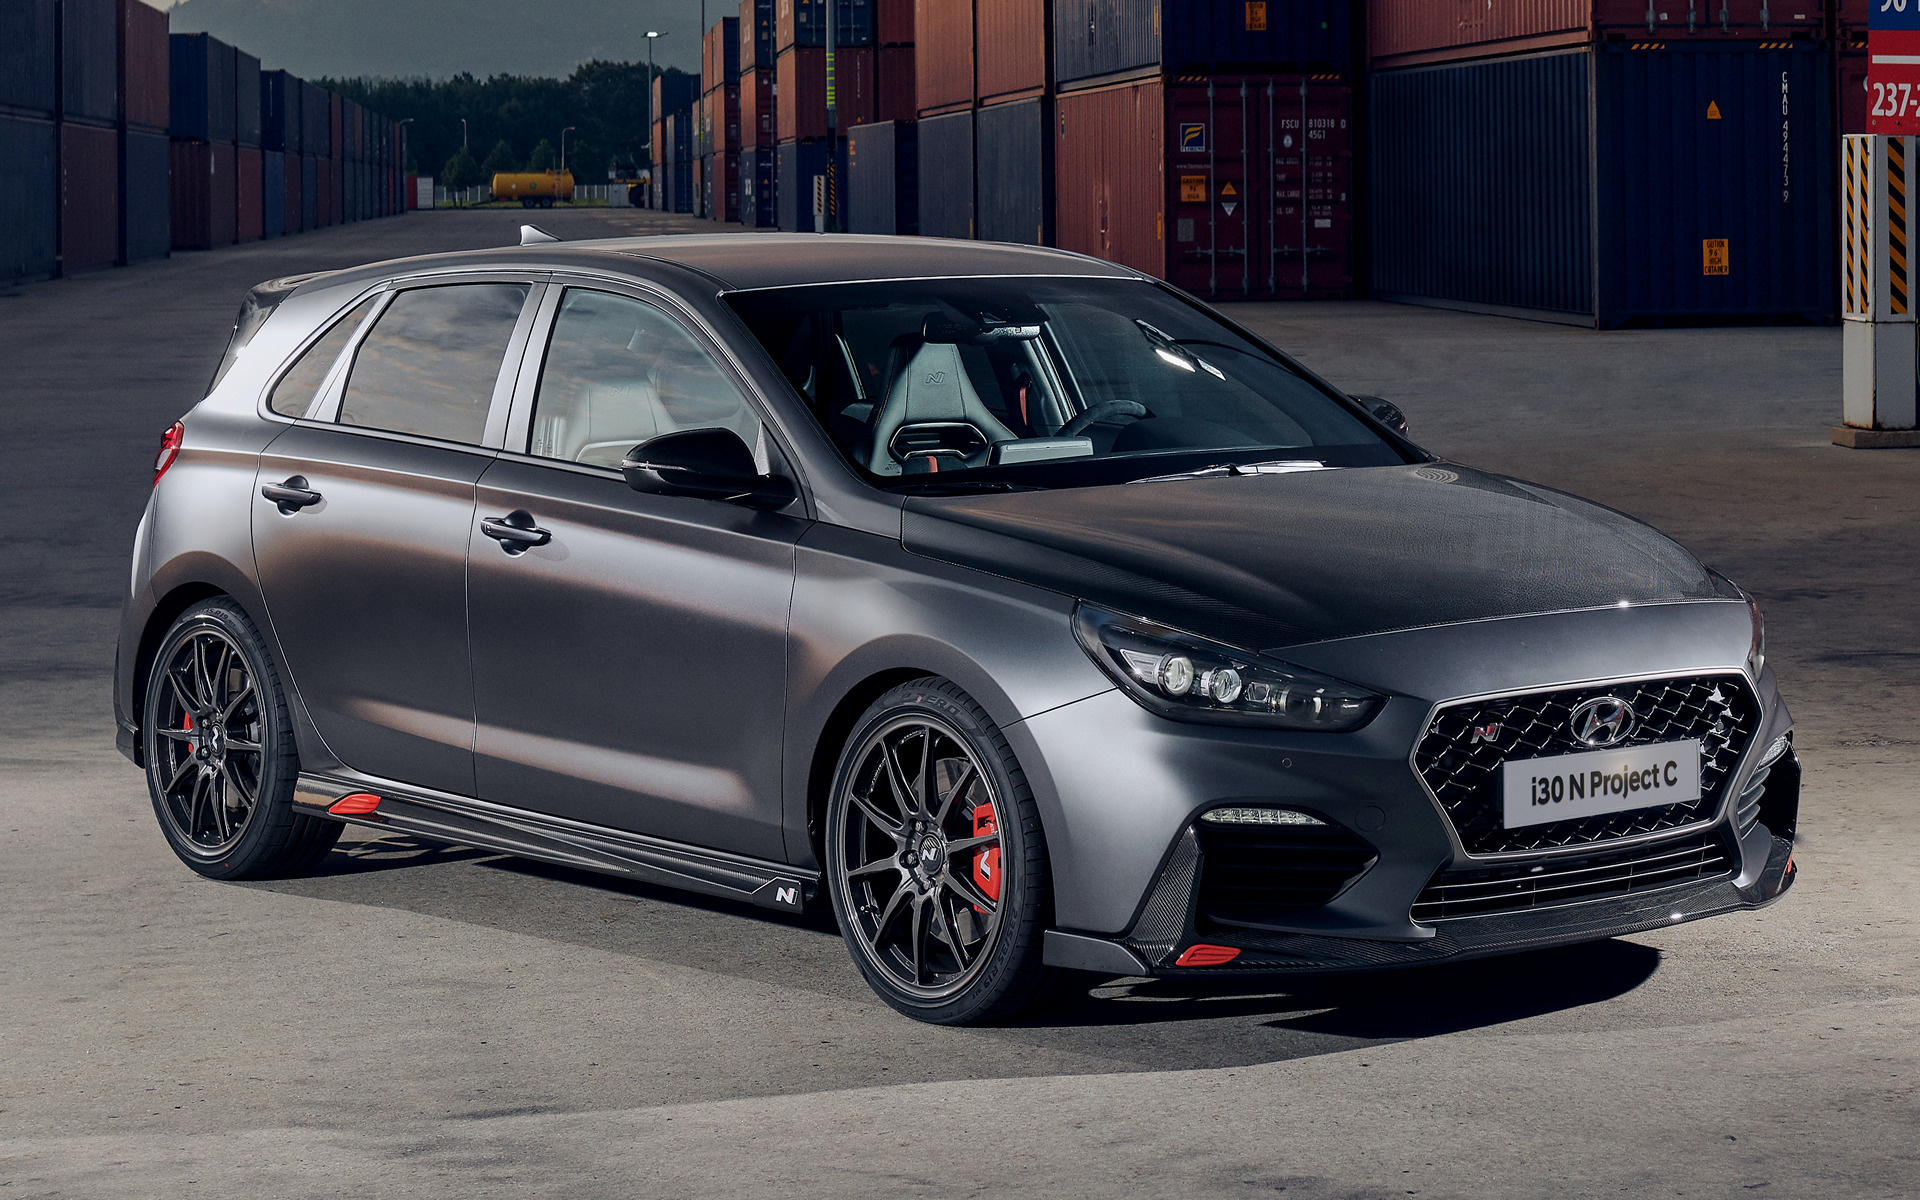 2019 Hyundai i30 N Project C - Wallpapers and HD Images | Car Pixel